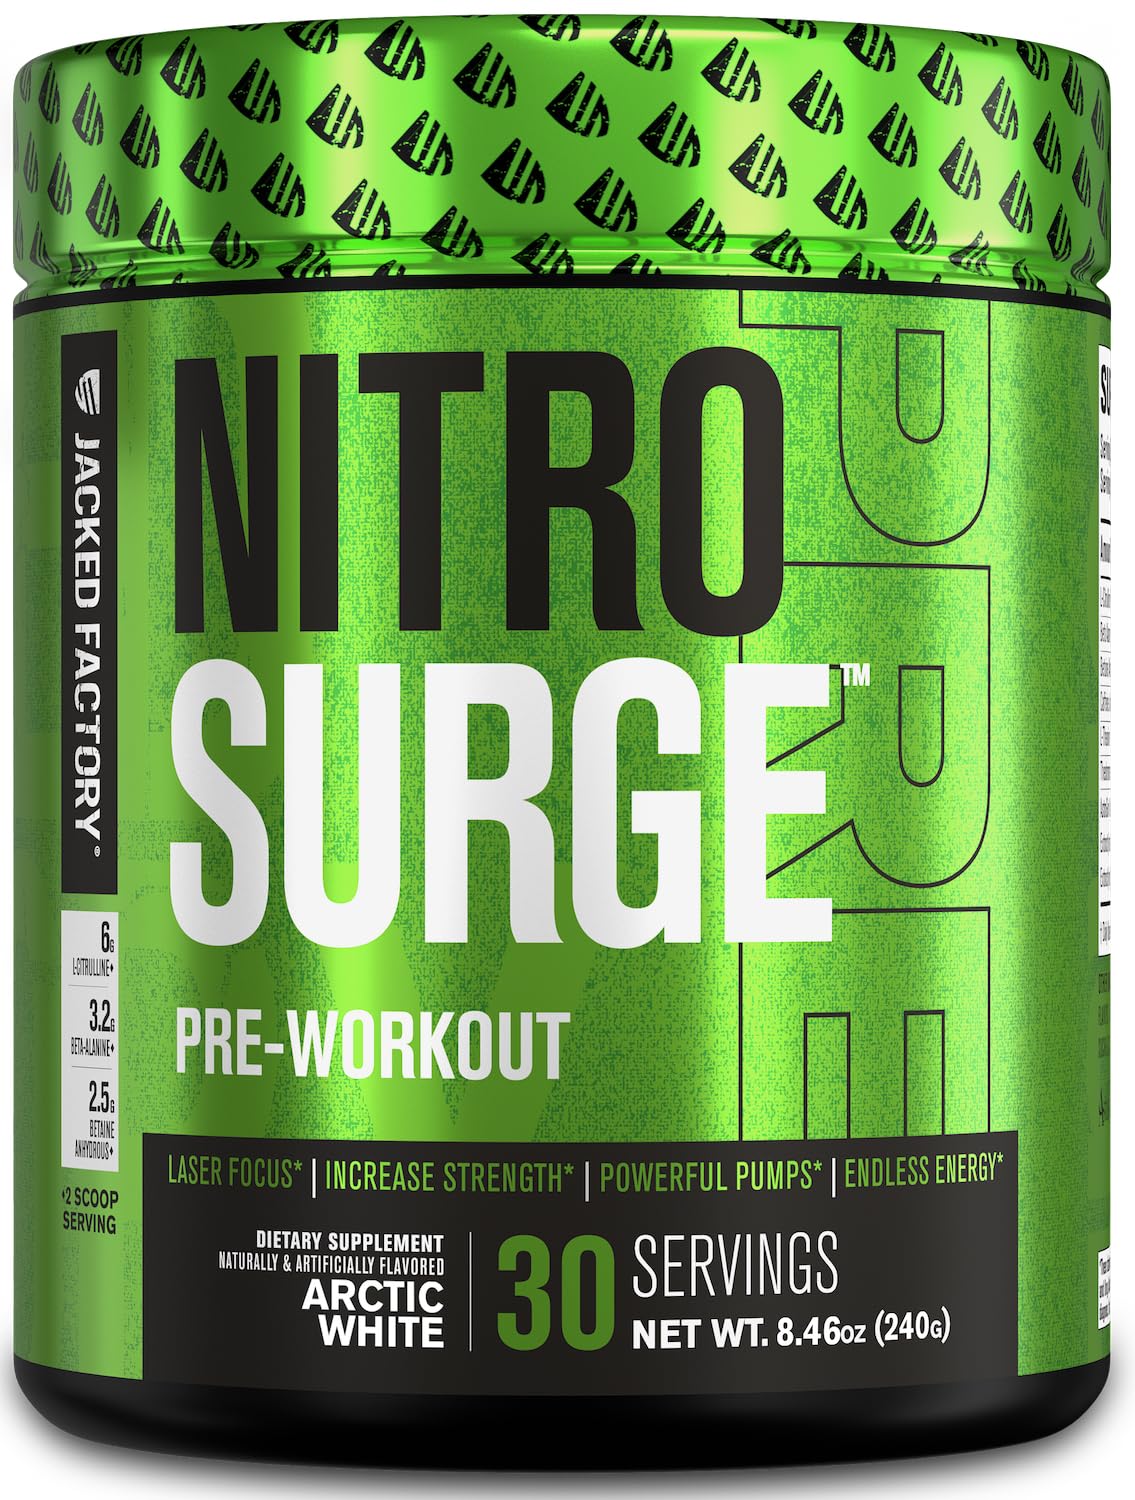 Jacked Factory NITROSURgE Pre Workout Supplement - Endless Energy, Instant Strength gains, clear Focus, Intense Pumps - Nitric Oxide Booster & 